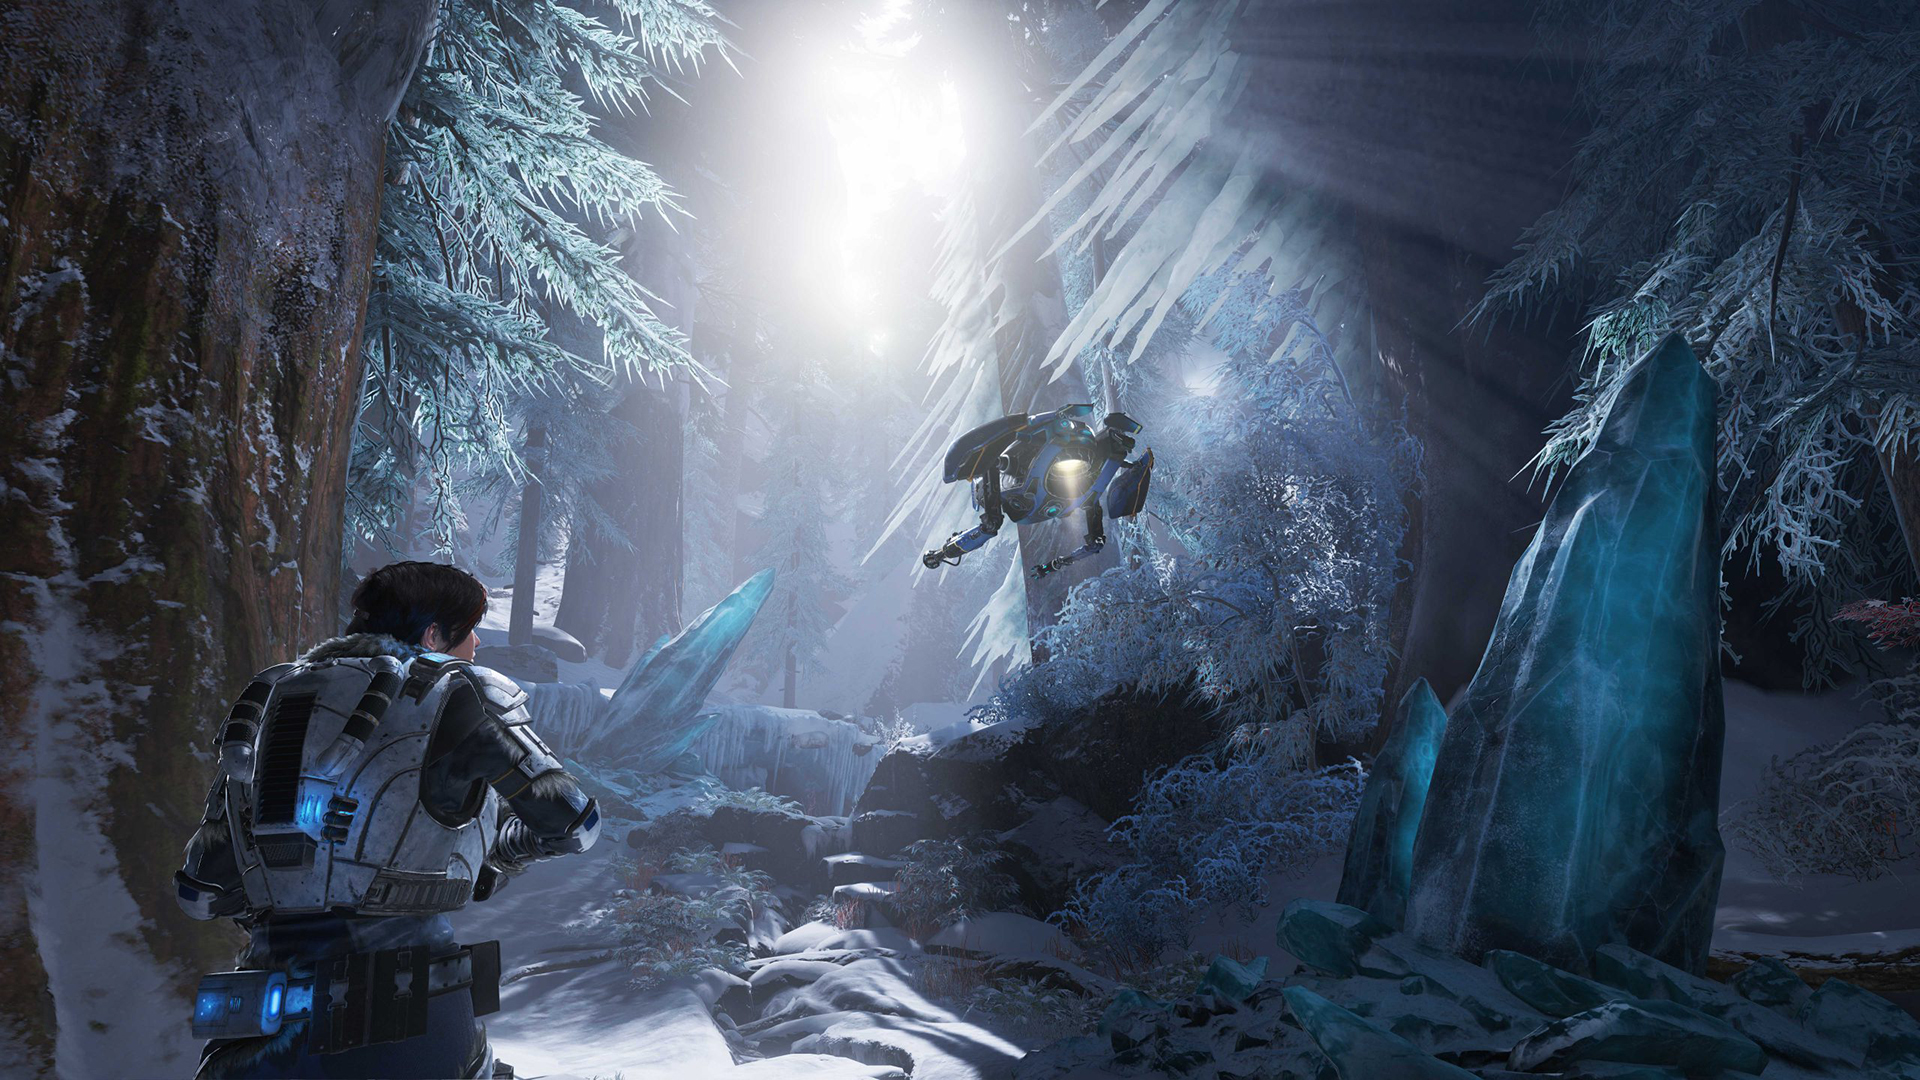 Gears 5 Kait and Jack ice forest background